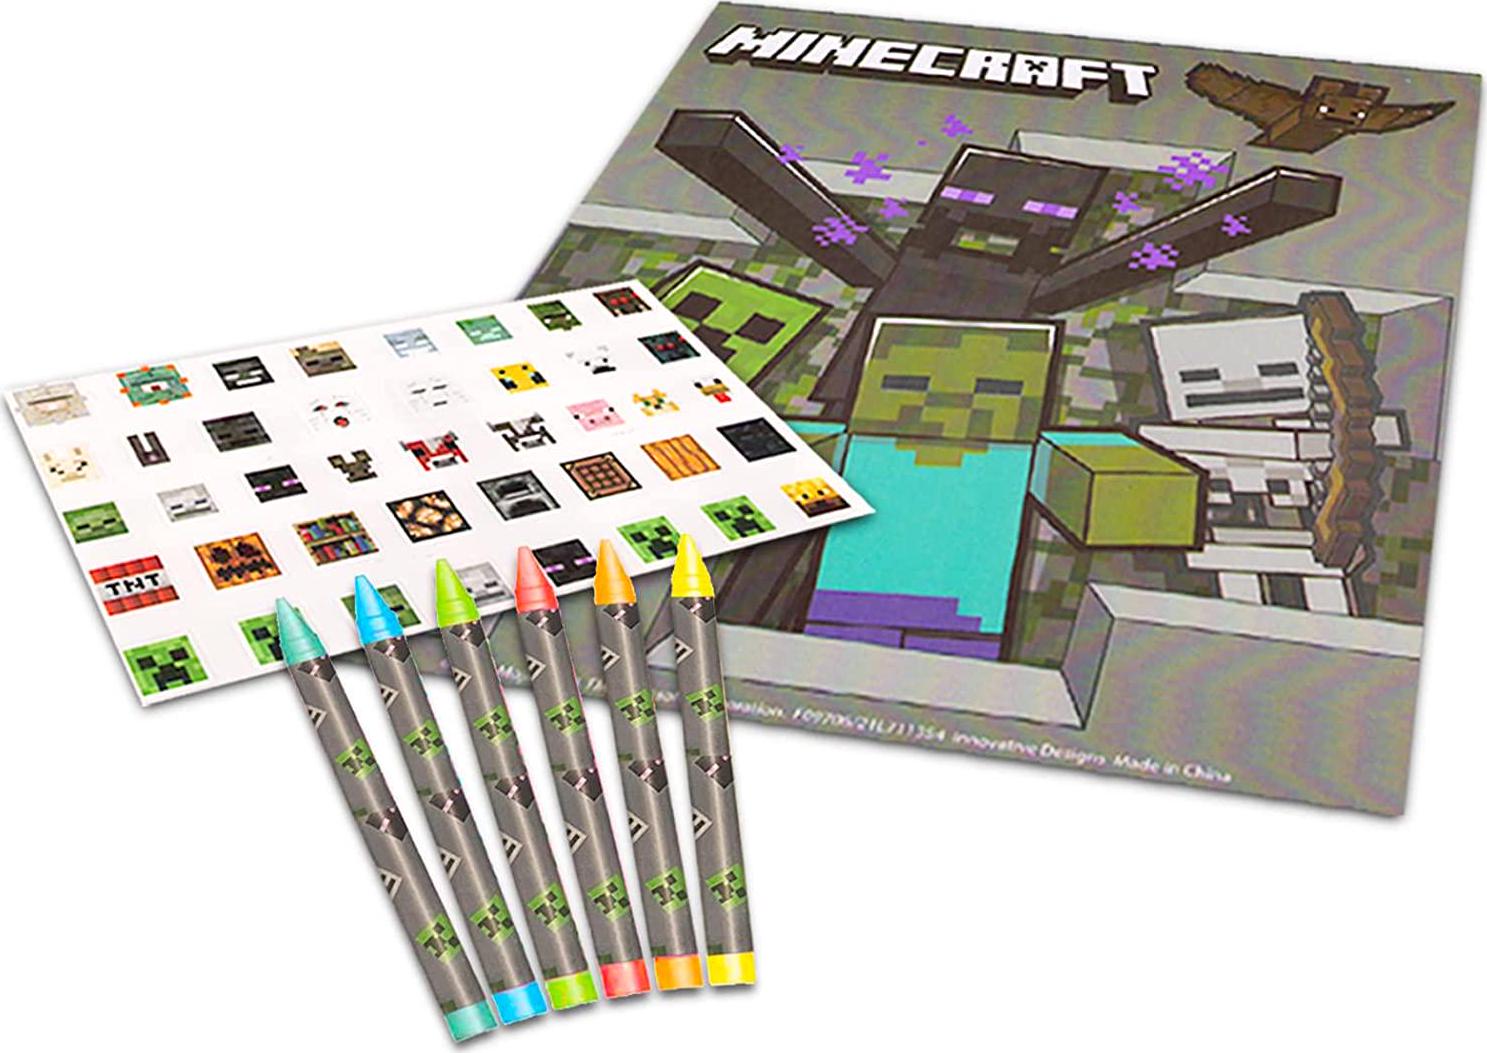 Generic, Minecraft Lap Desk Travel Art Set - Bundle with Minecraft Art Clipboard with Sketchpad and Coloring Utensils Plus Battle Party Stickers and More (Art Lap Desk for Kids)